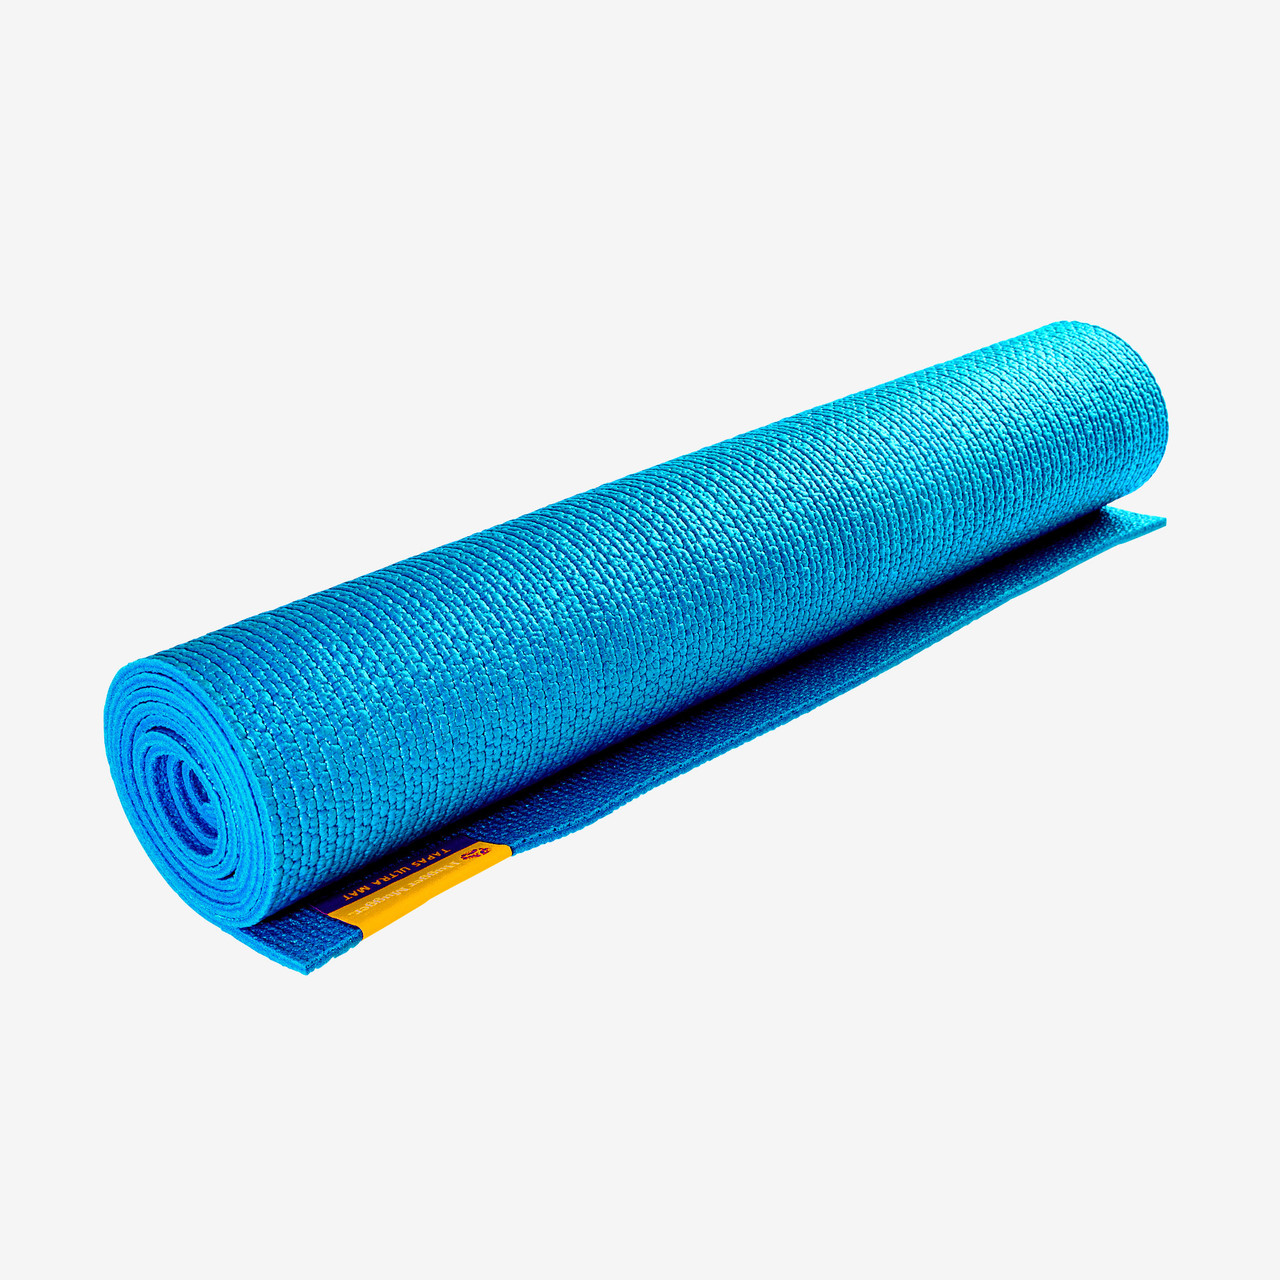 5 Great Yoga Mats for Tall People